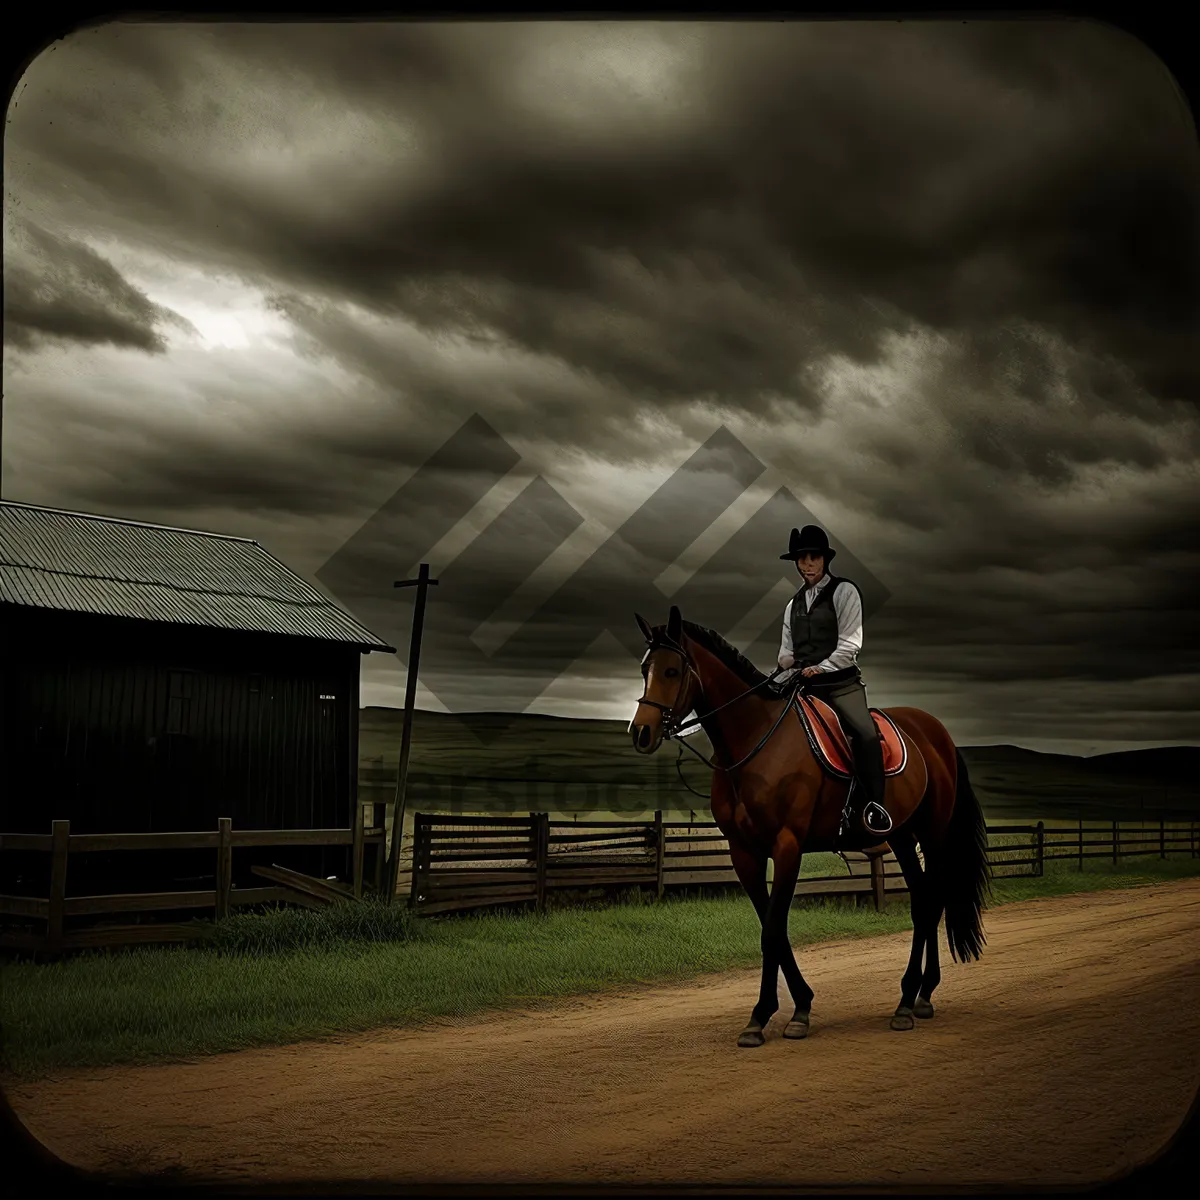 Picture of Equestrian Horseback Riding Sport on Ranch